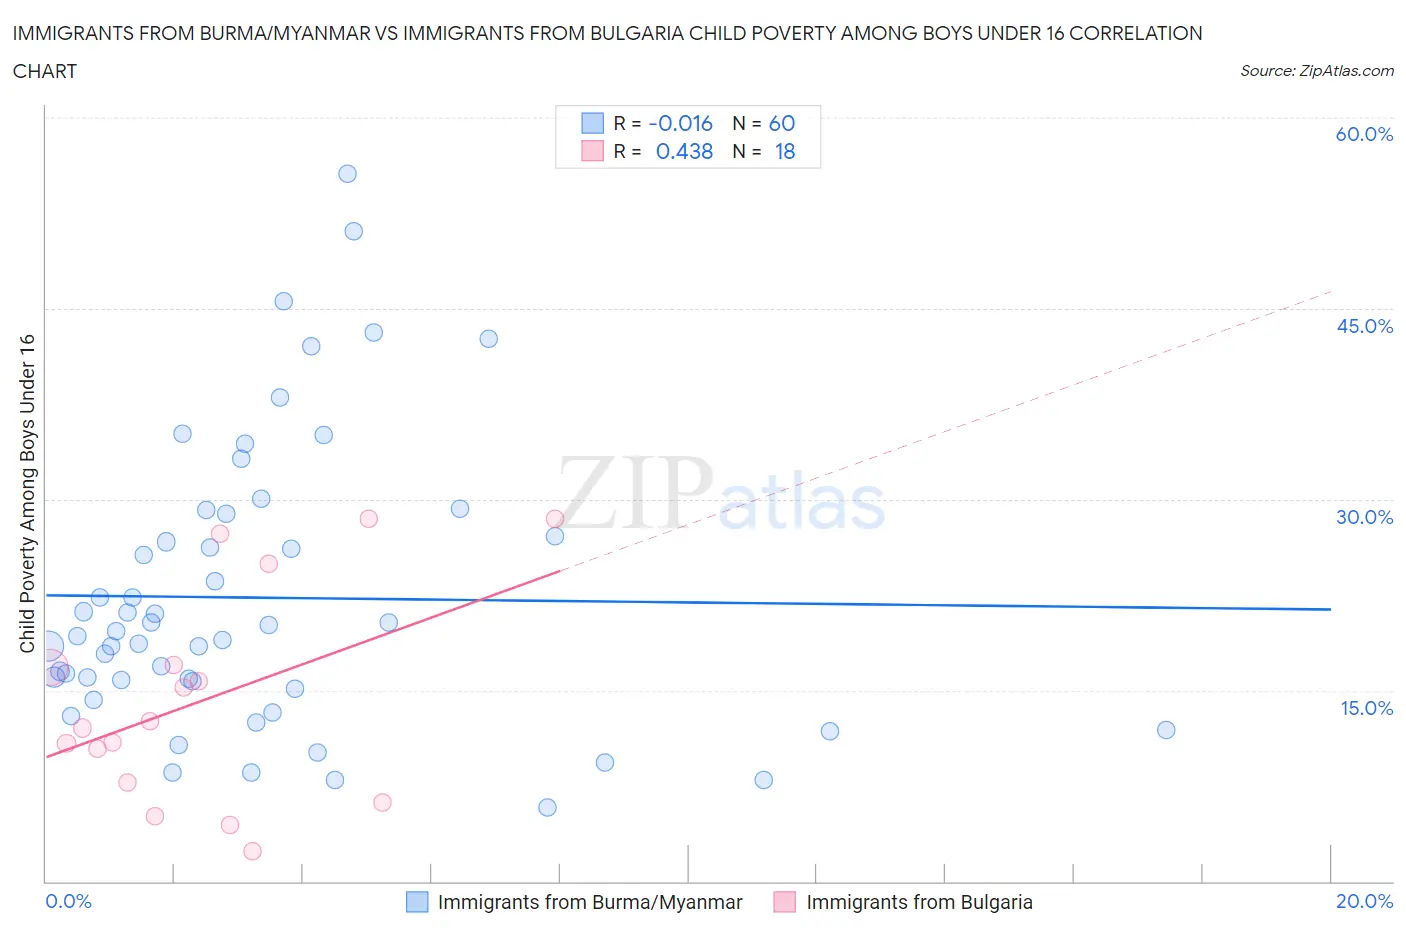 Immigrants from Burma/Myanmar vs Immigrants from Bulgaria Child Poverty Among Boys Under 16